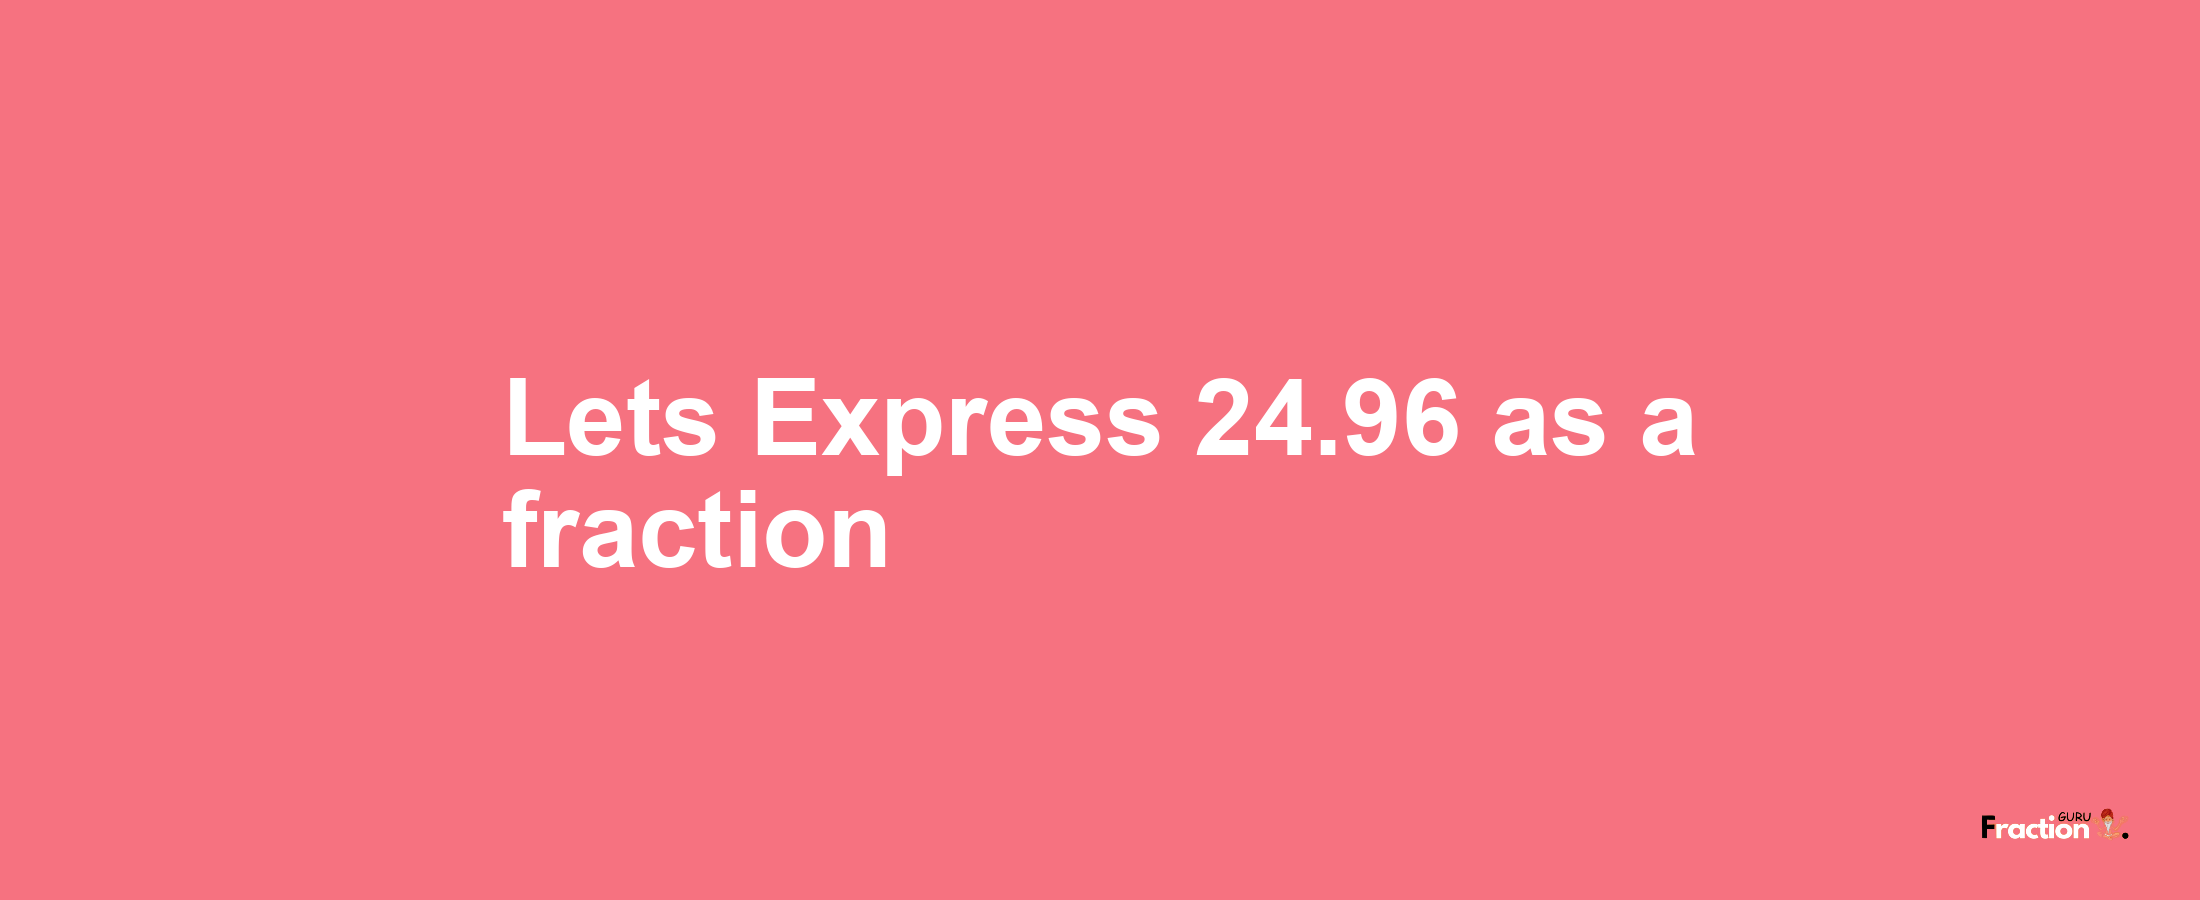 Lets Express 24.96 as afraction